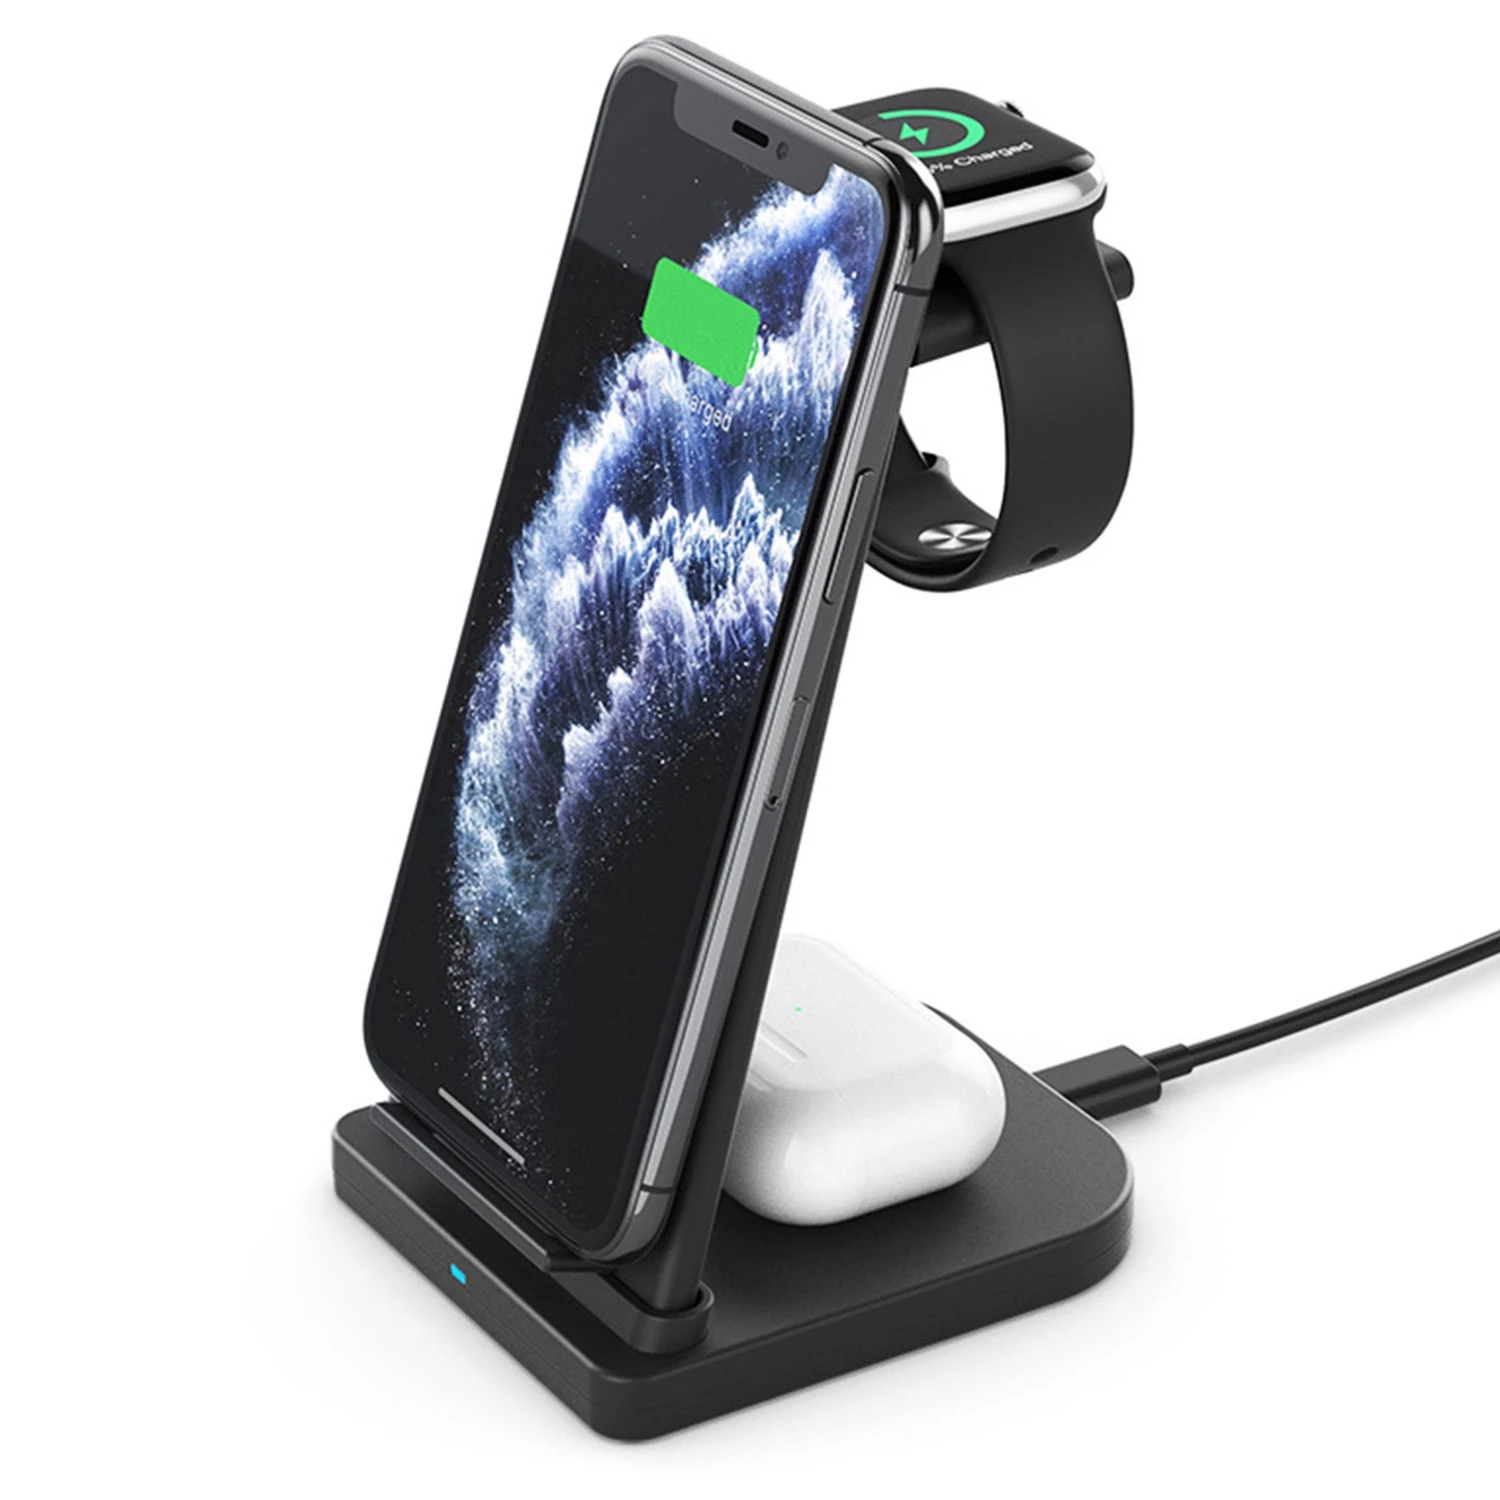 15W Fast Charging Station for iPhone, iWatch, AirPods - Qi Enabled Dock